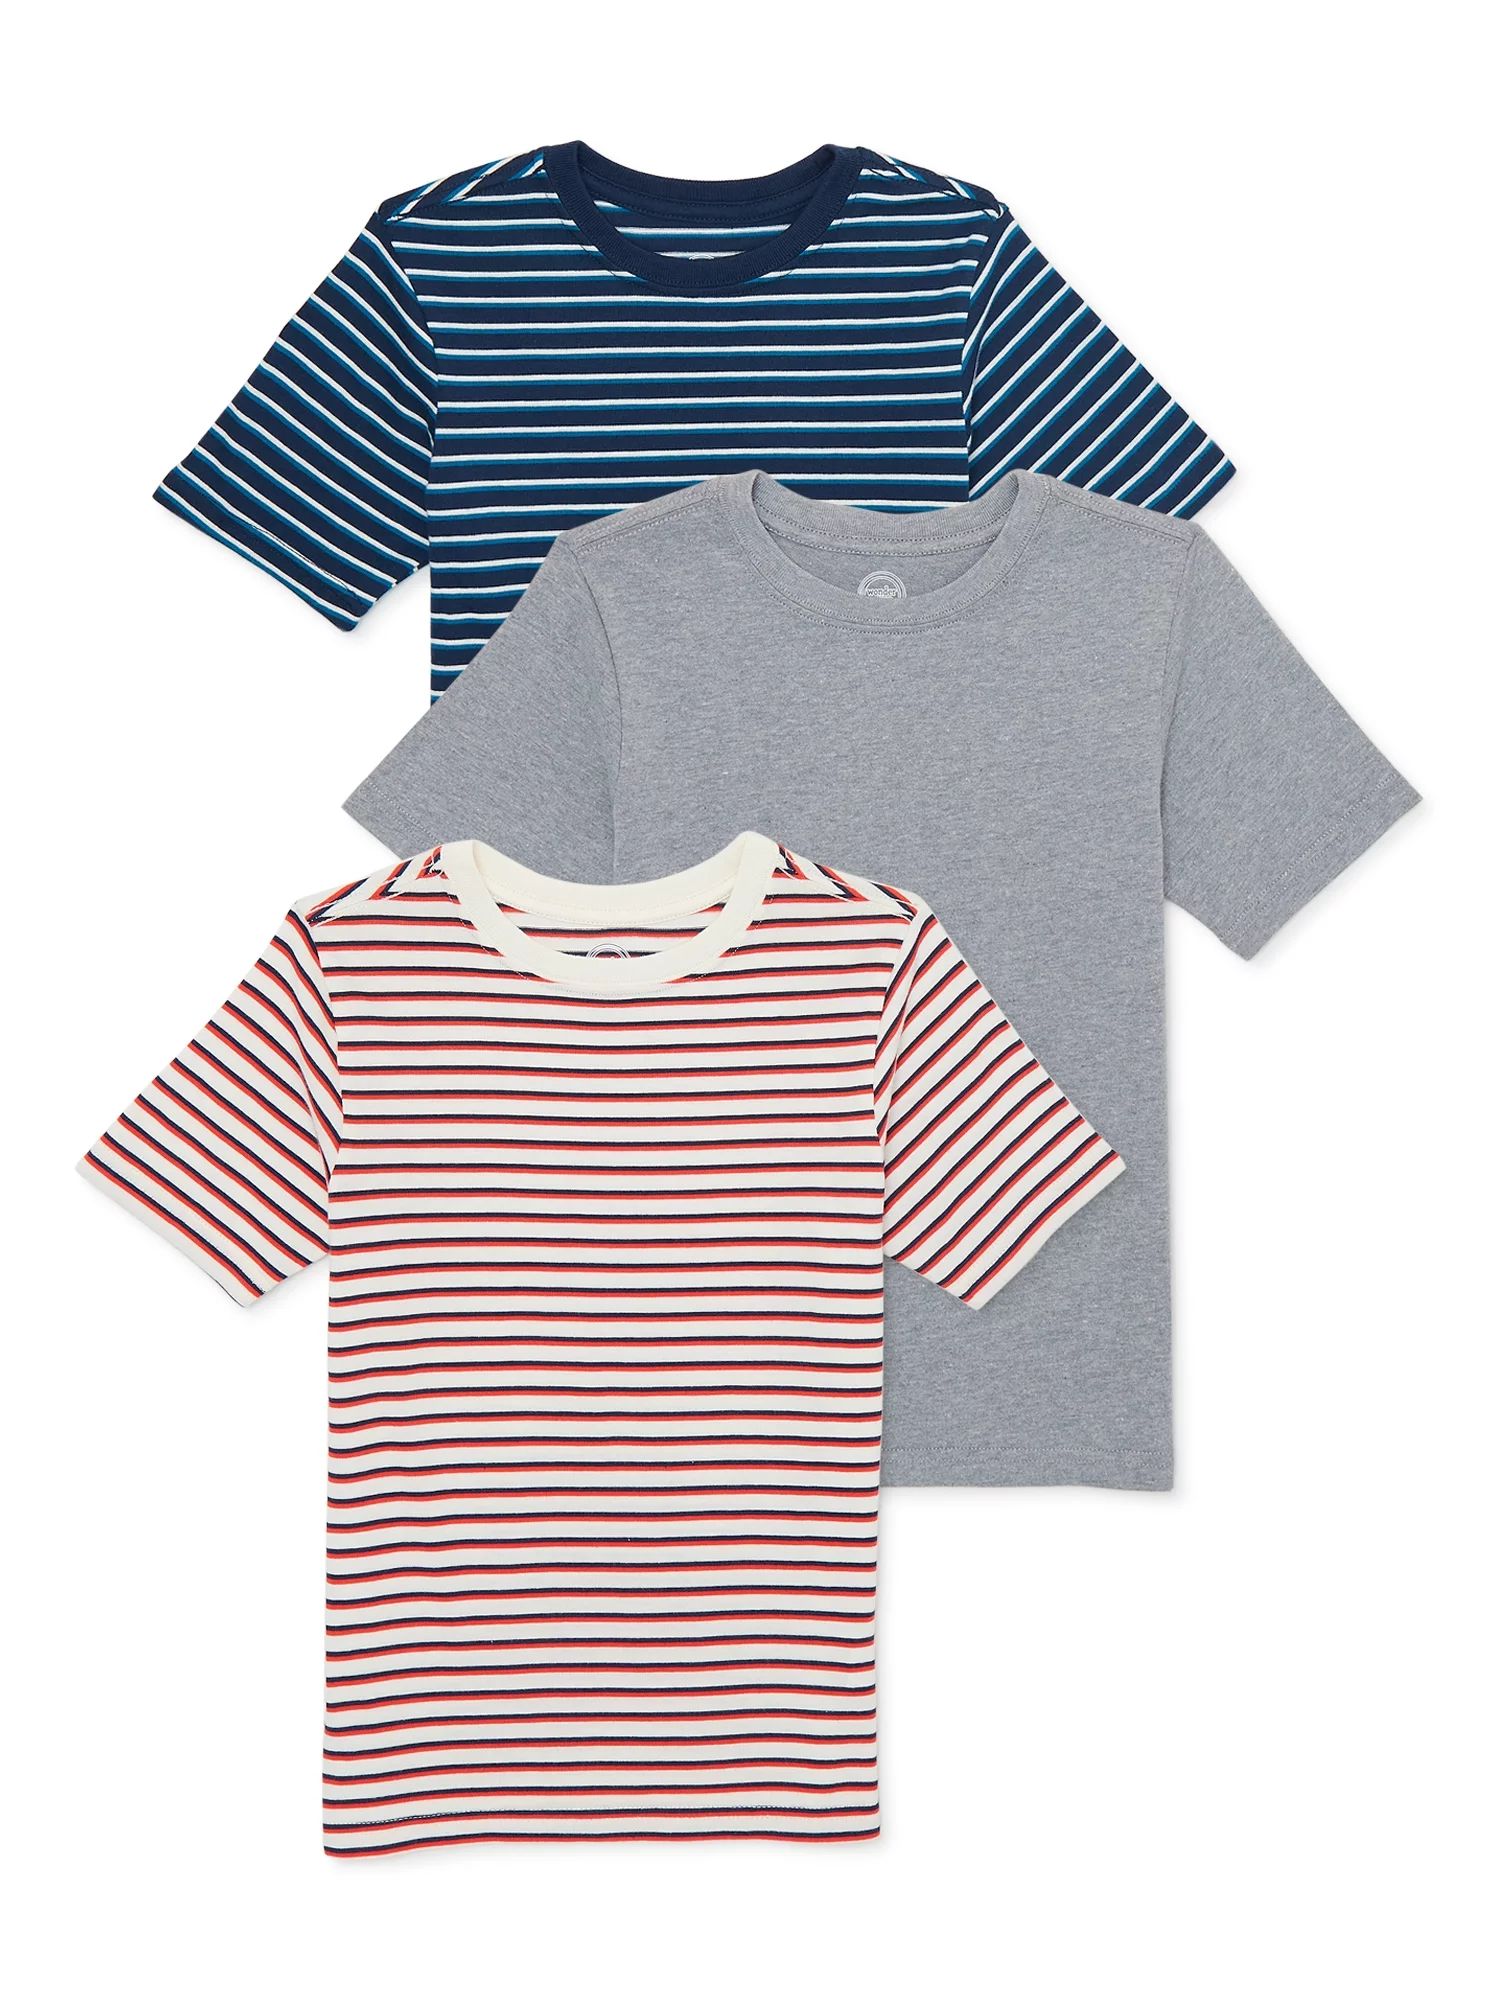 Wonder Nation Boys Short Sleeve Solid and Striped T-Shirts, 3-Pack, Sizes 4-18 & Husky | Walmart (US)